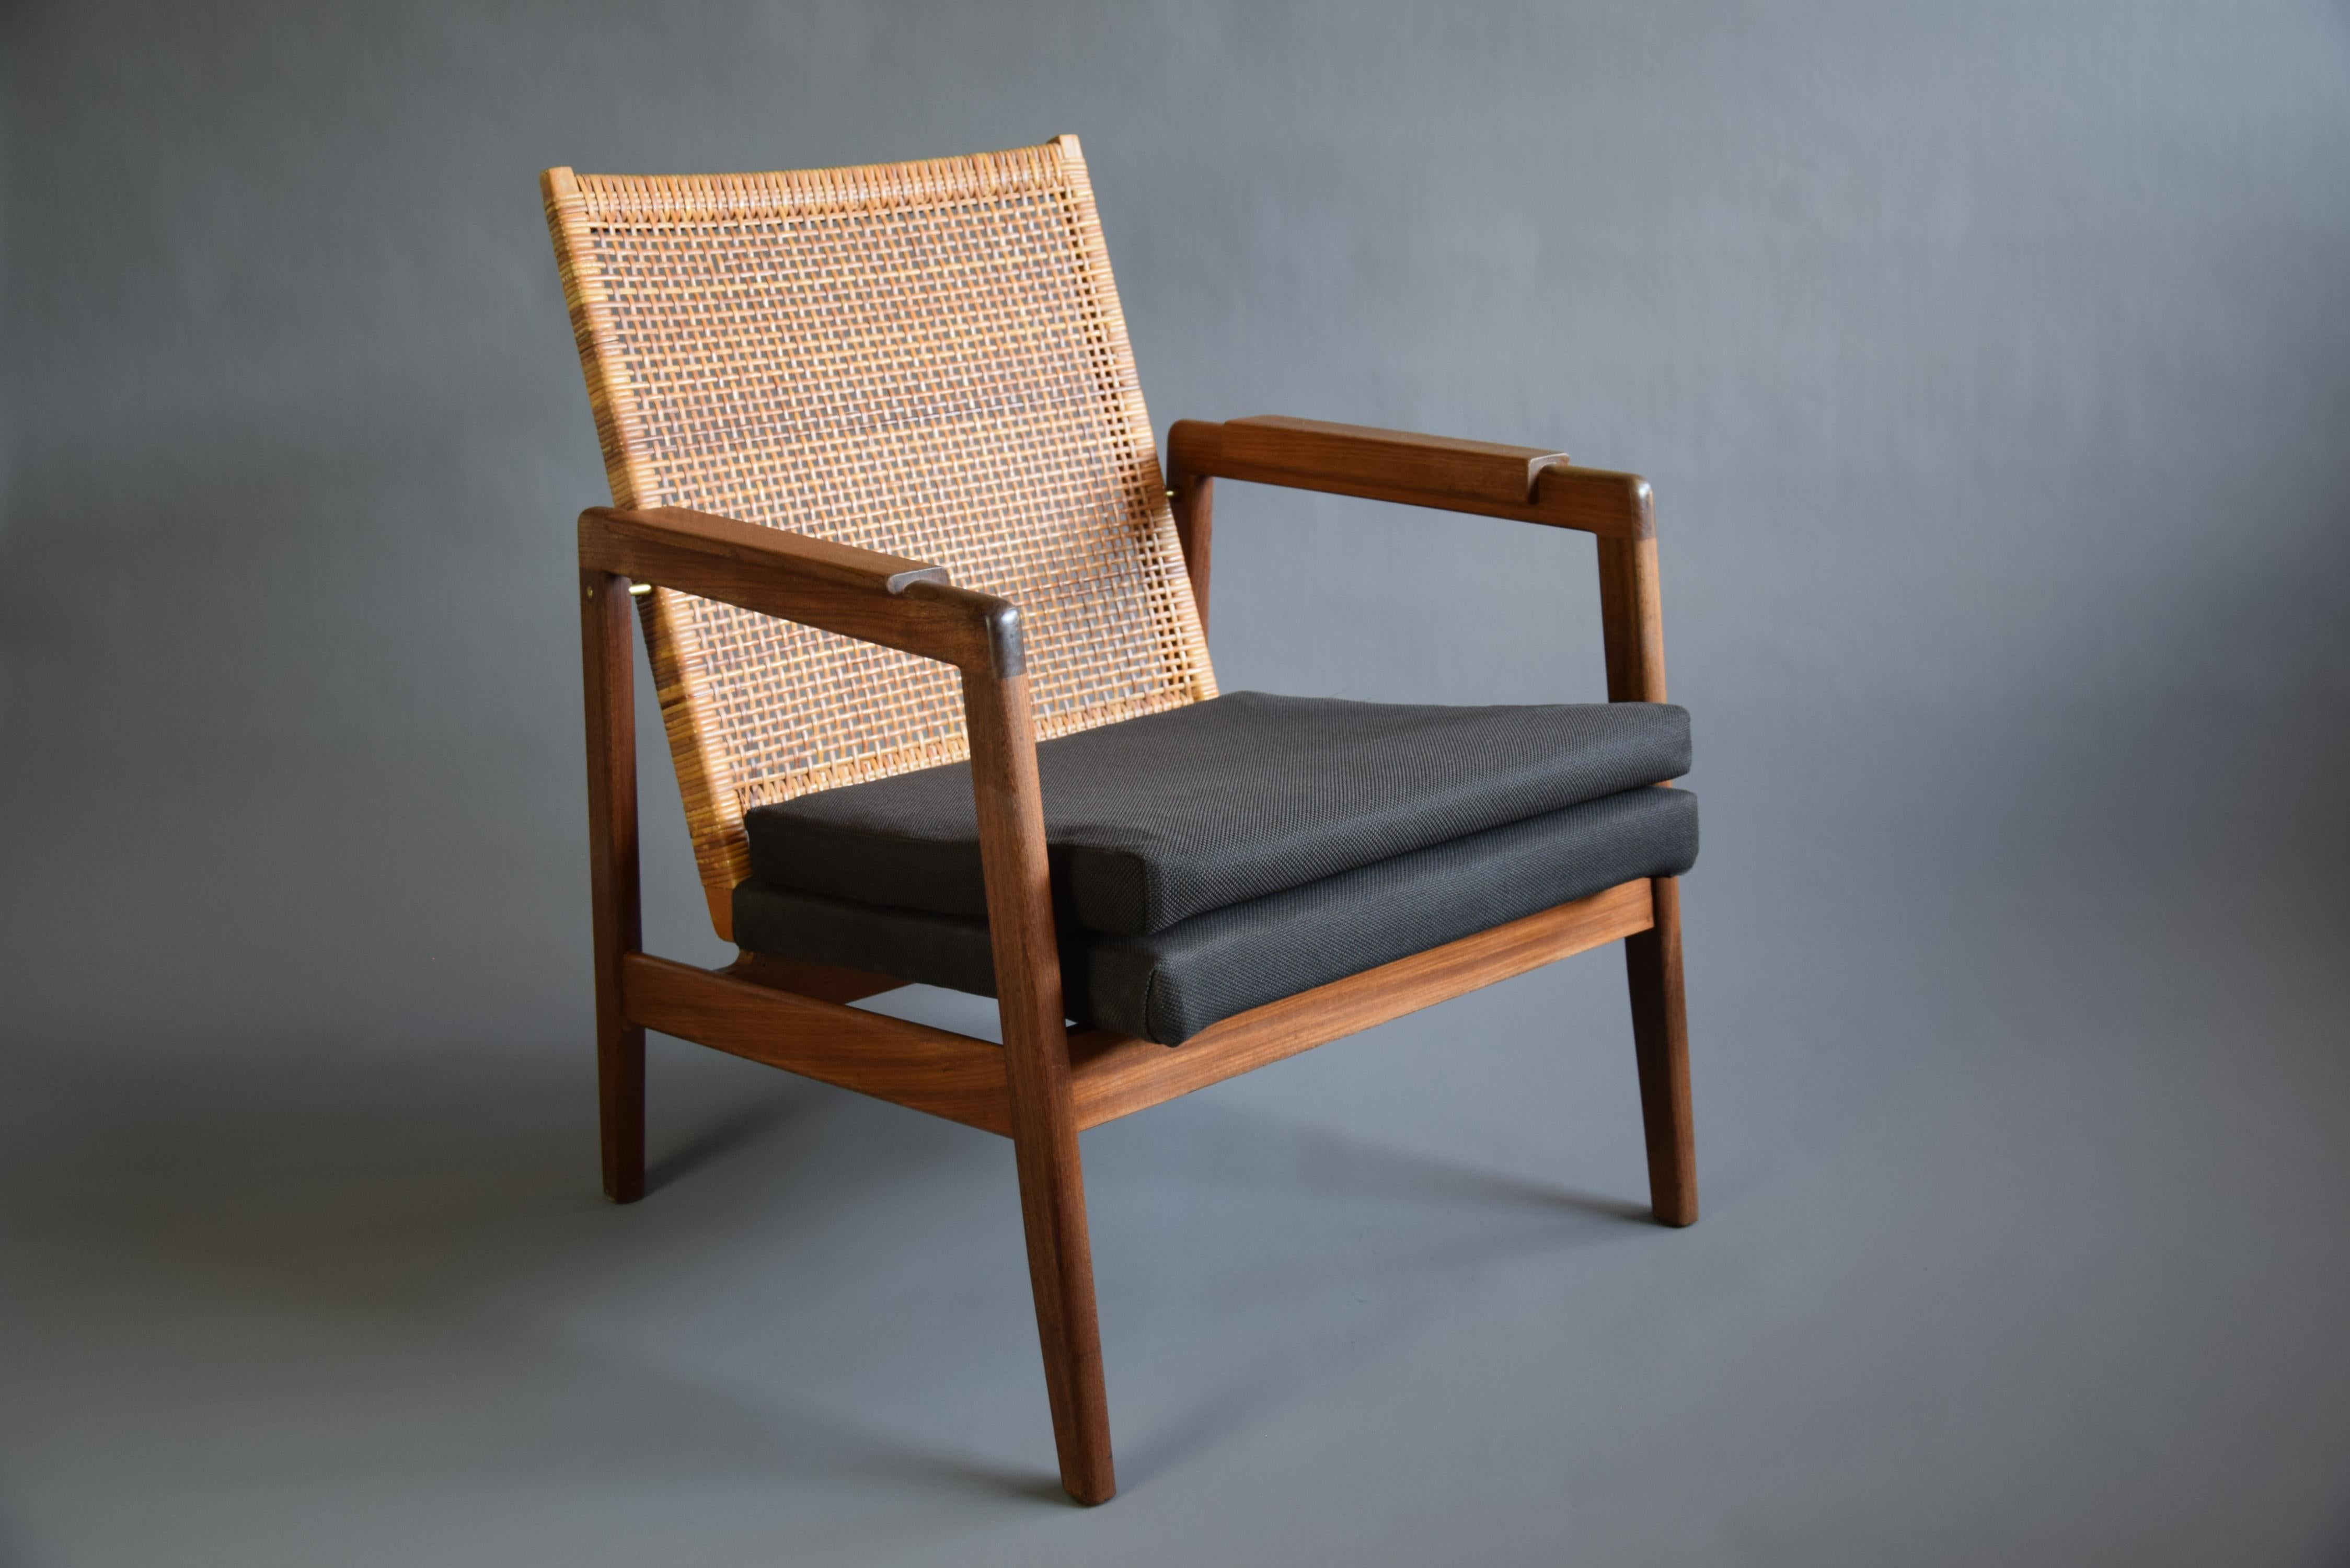 Dutch Mid-Century Modern Cane and Wood Lounge Chair